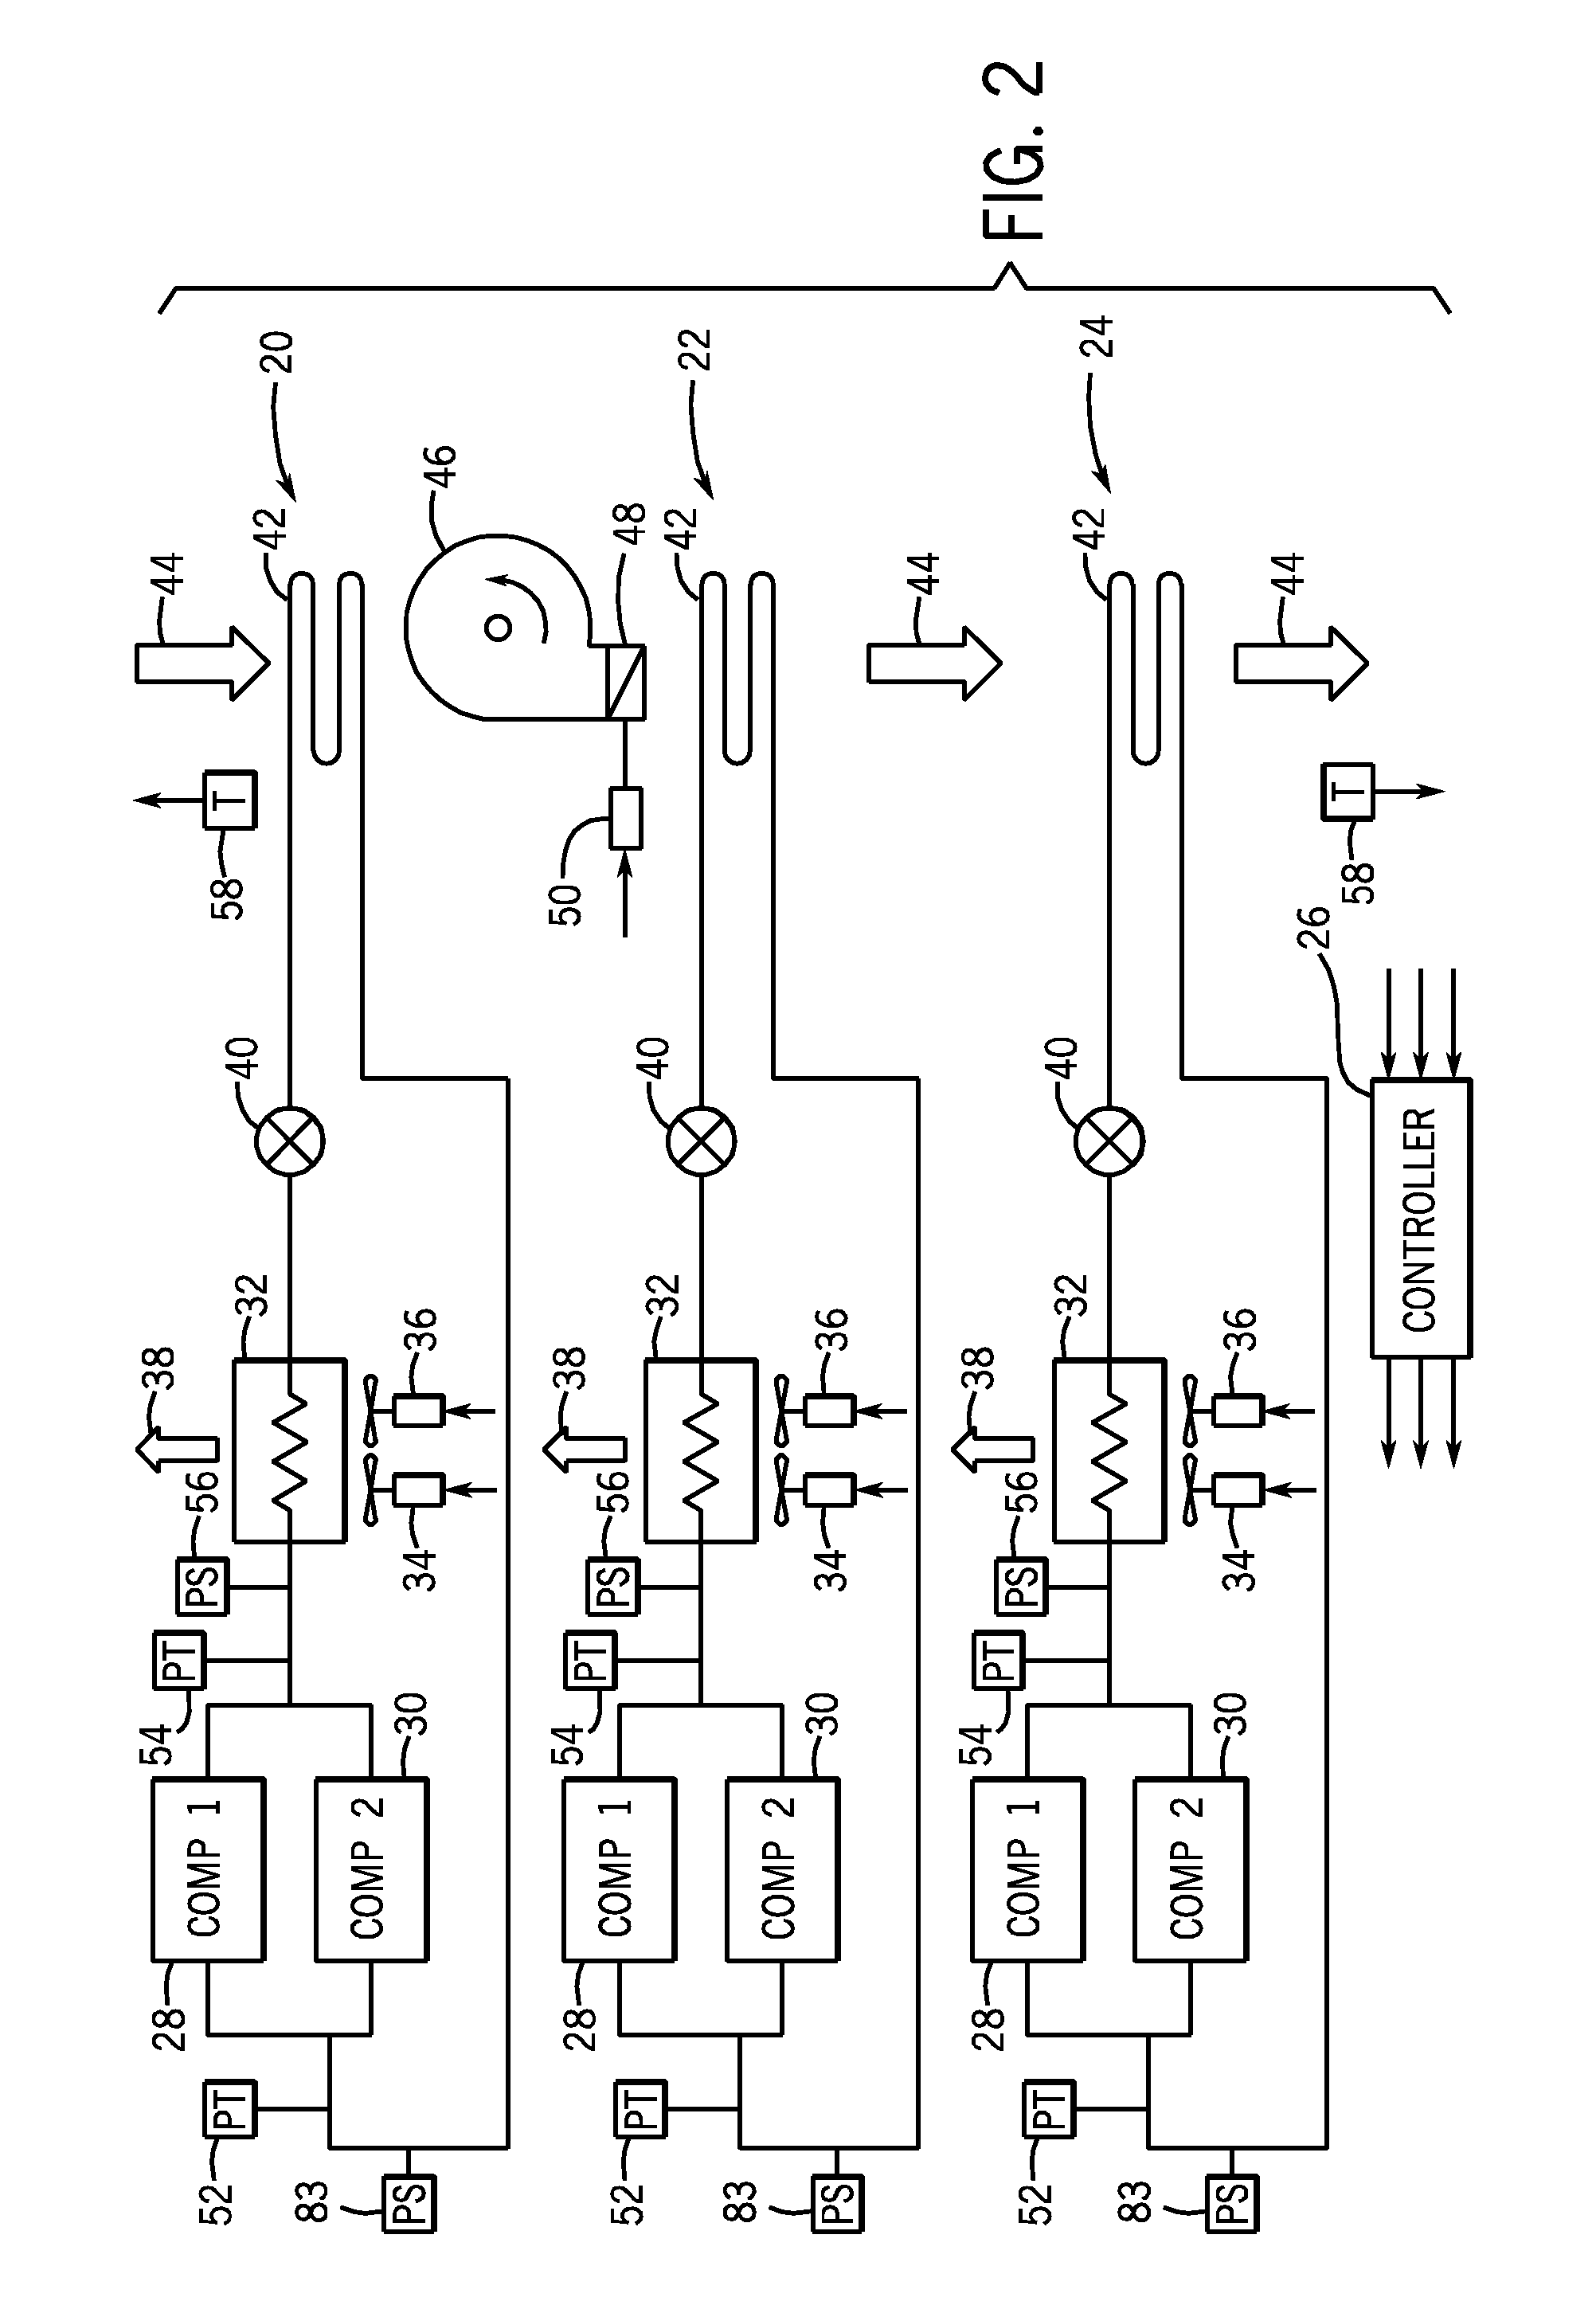 Parked aircraft climate control system and method